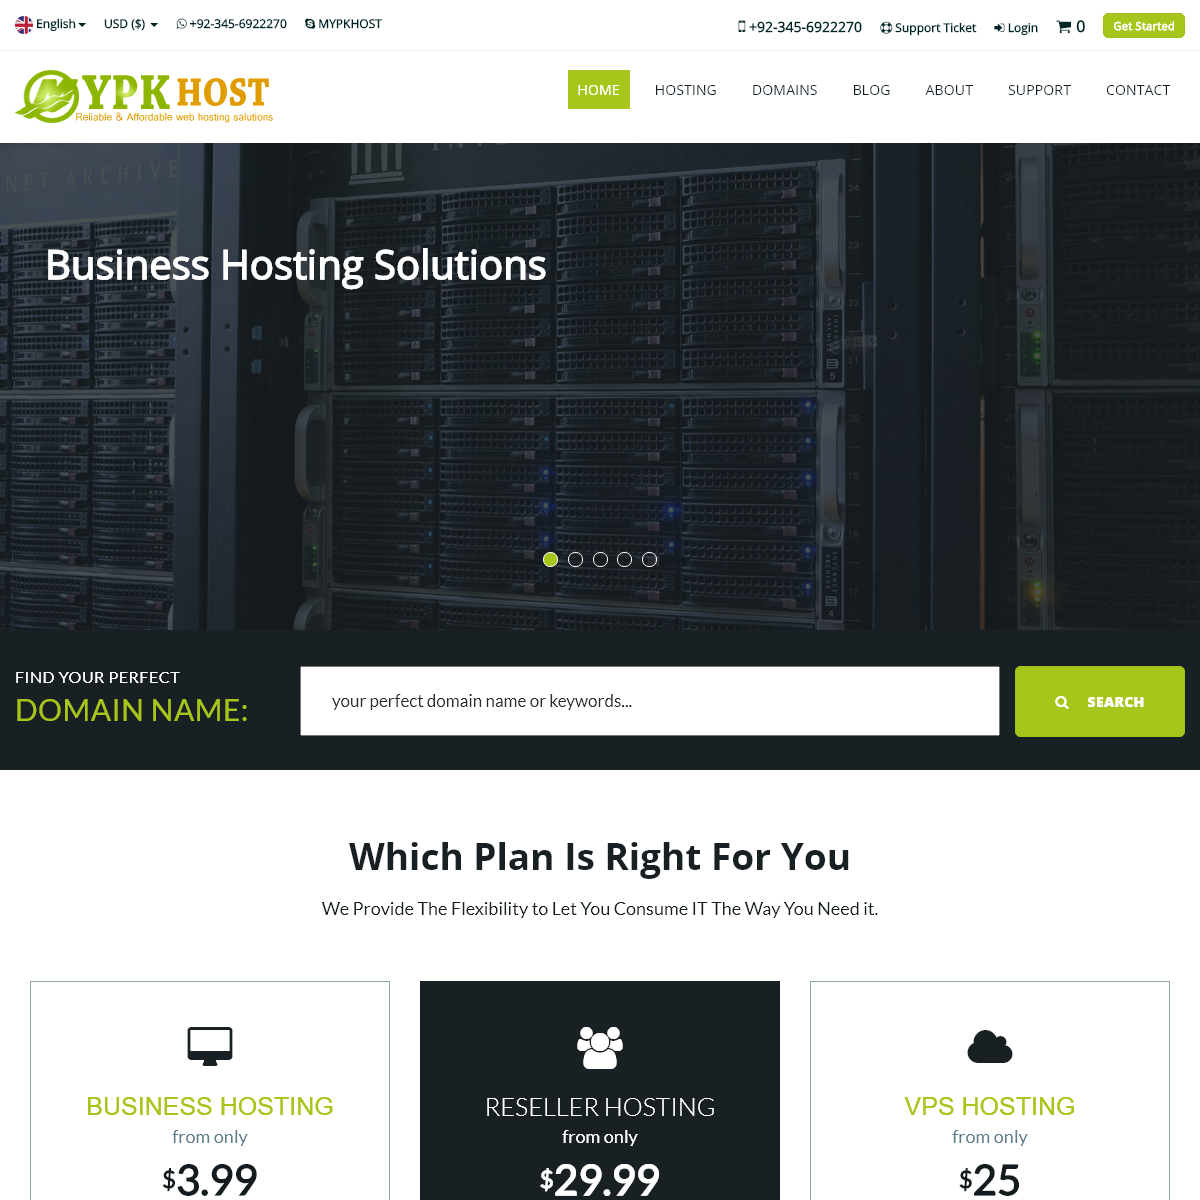 A complete backup of mypkhost.com